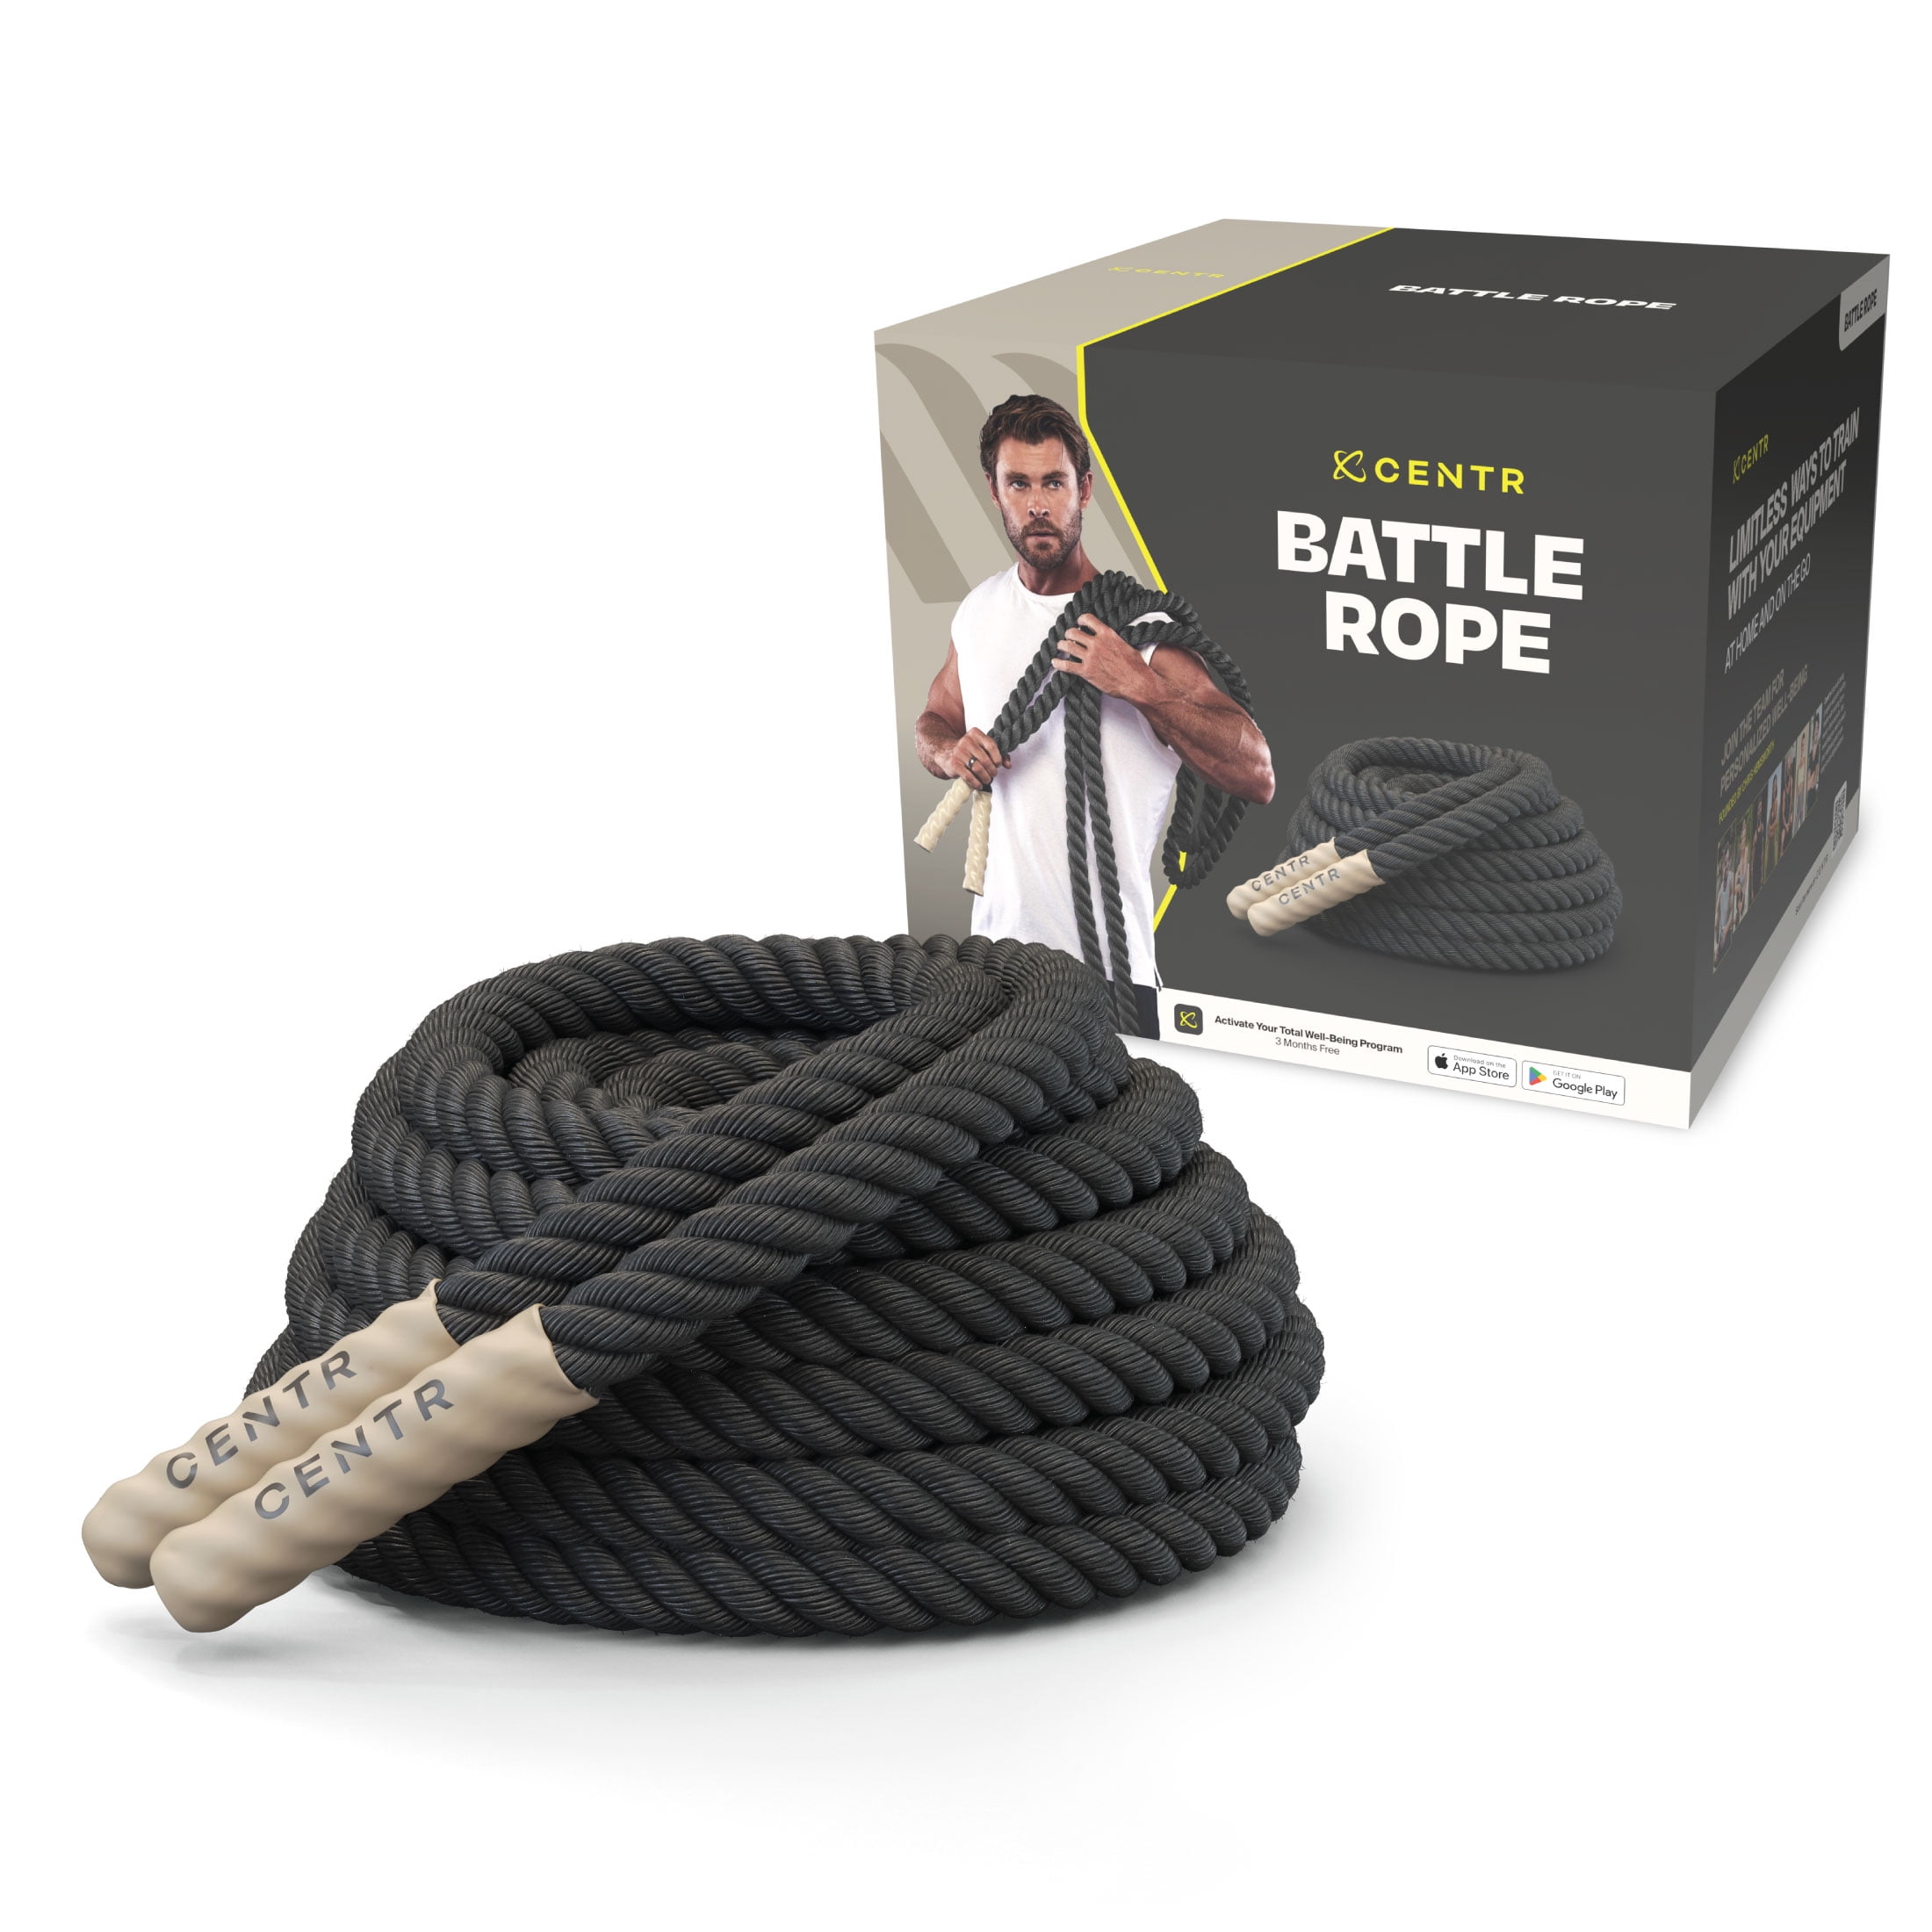 Centr by Chris Hemsworth Heavy-Duty Battle Rope for High Intensity Training, 40 ft + 3-Month Membership